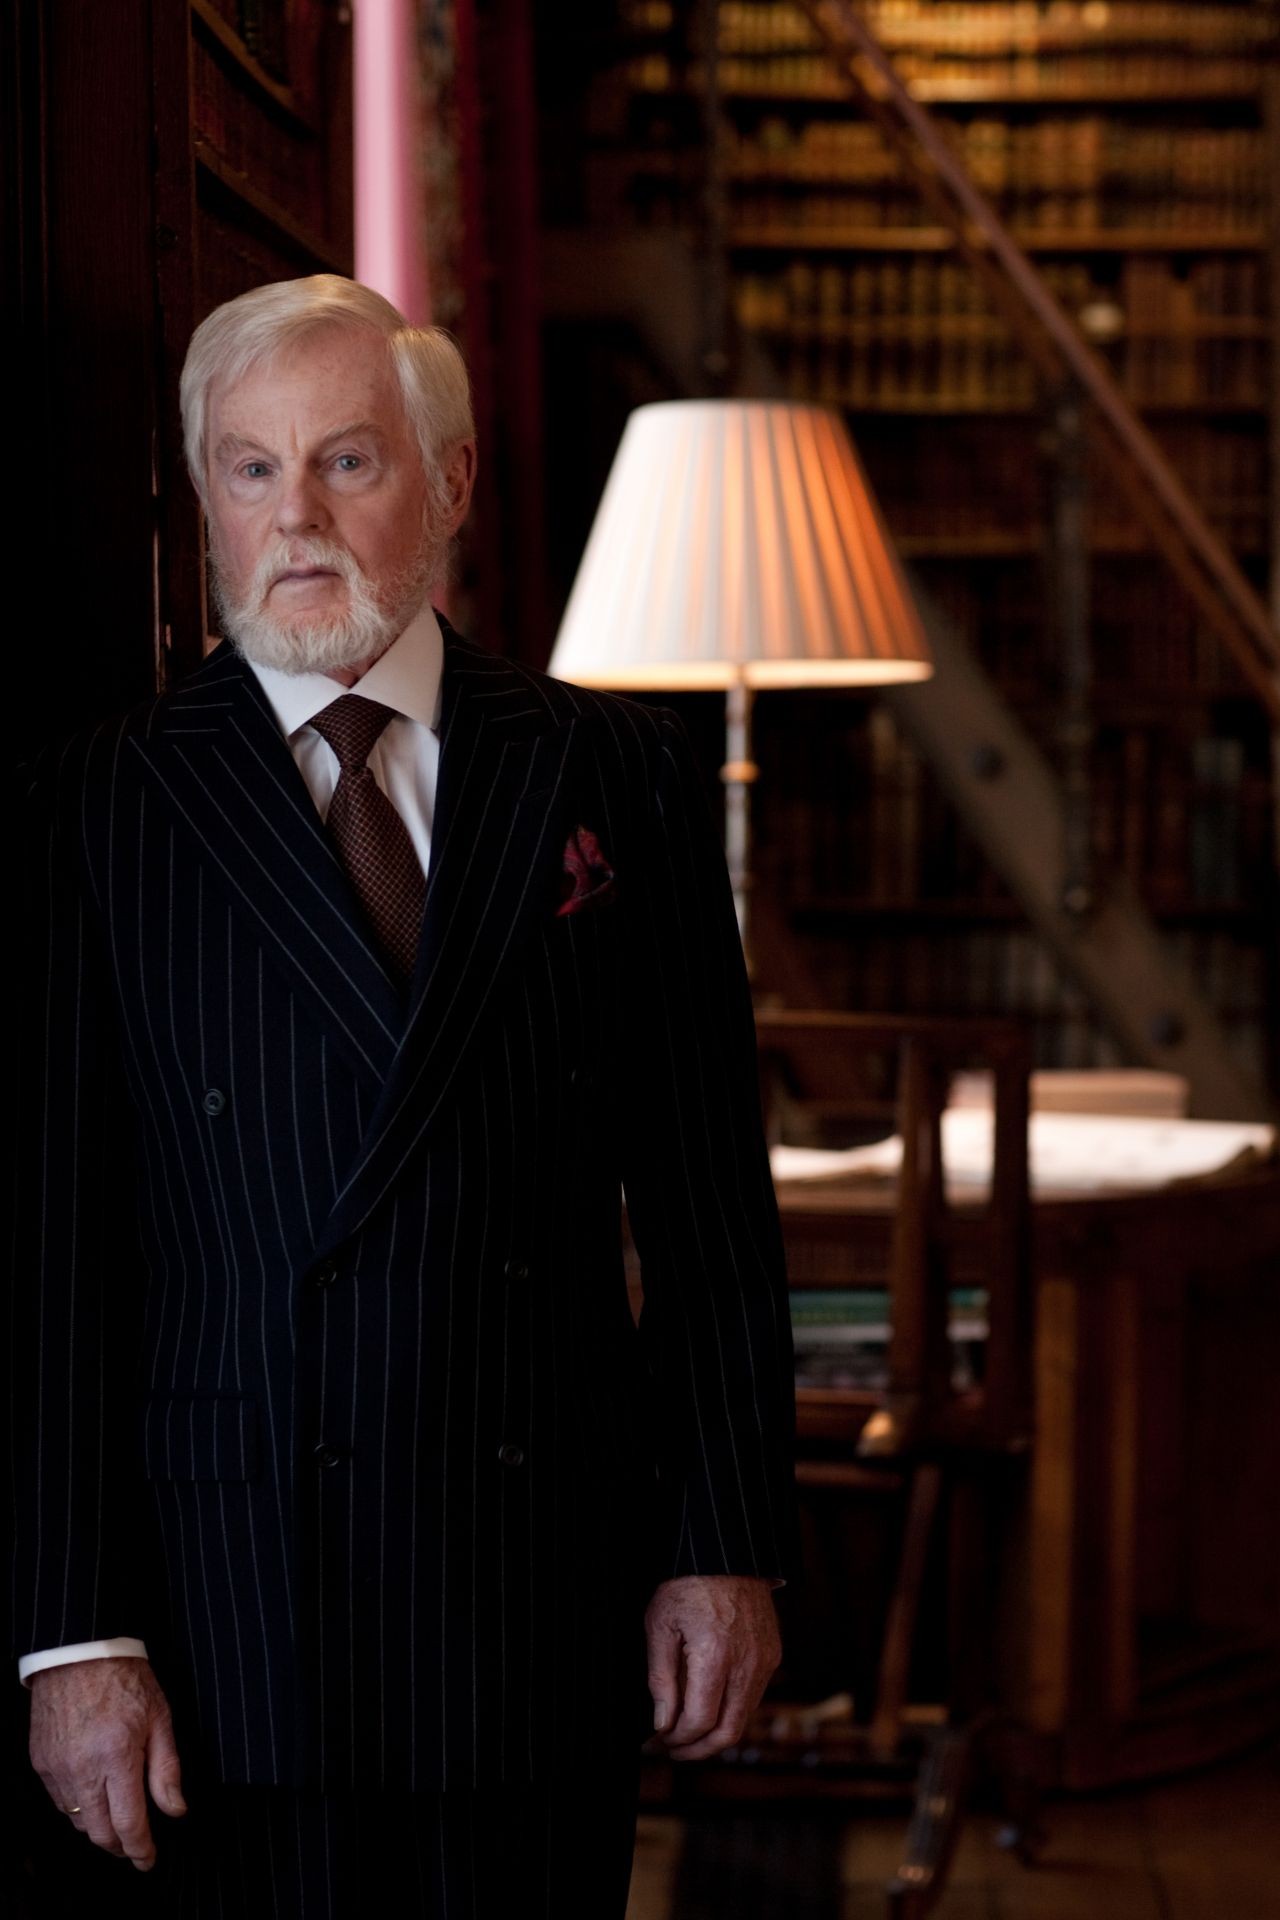 Derek Jacobi stars as Sir Owen Morshead in The Weinstein Company's My Week with Marilyn (2011). Photo credit by Laurence Cendrowicz.